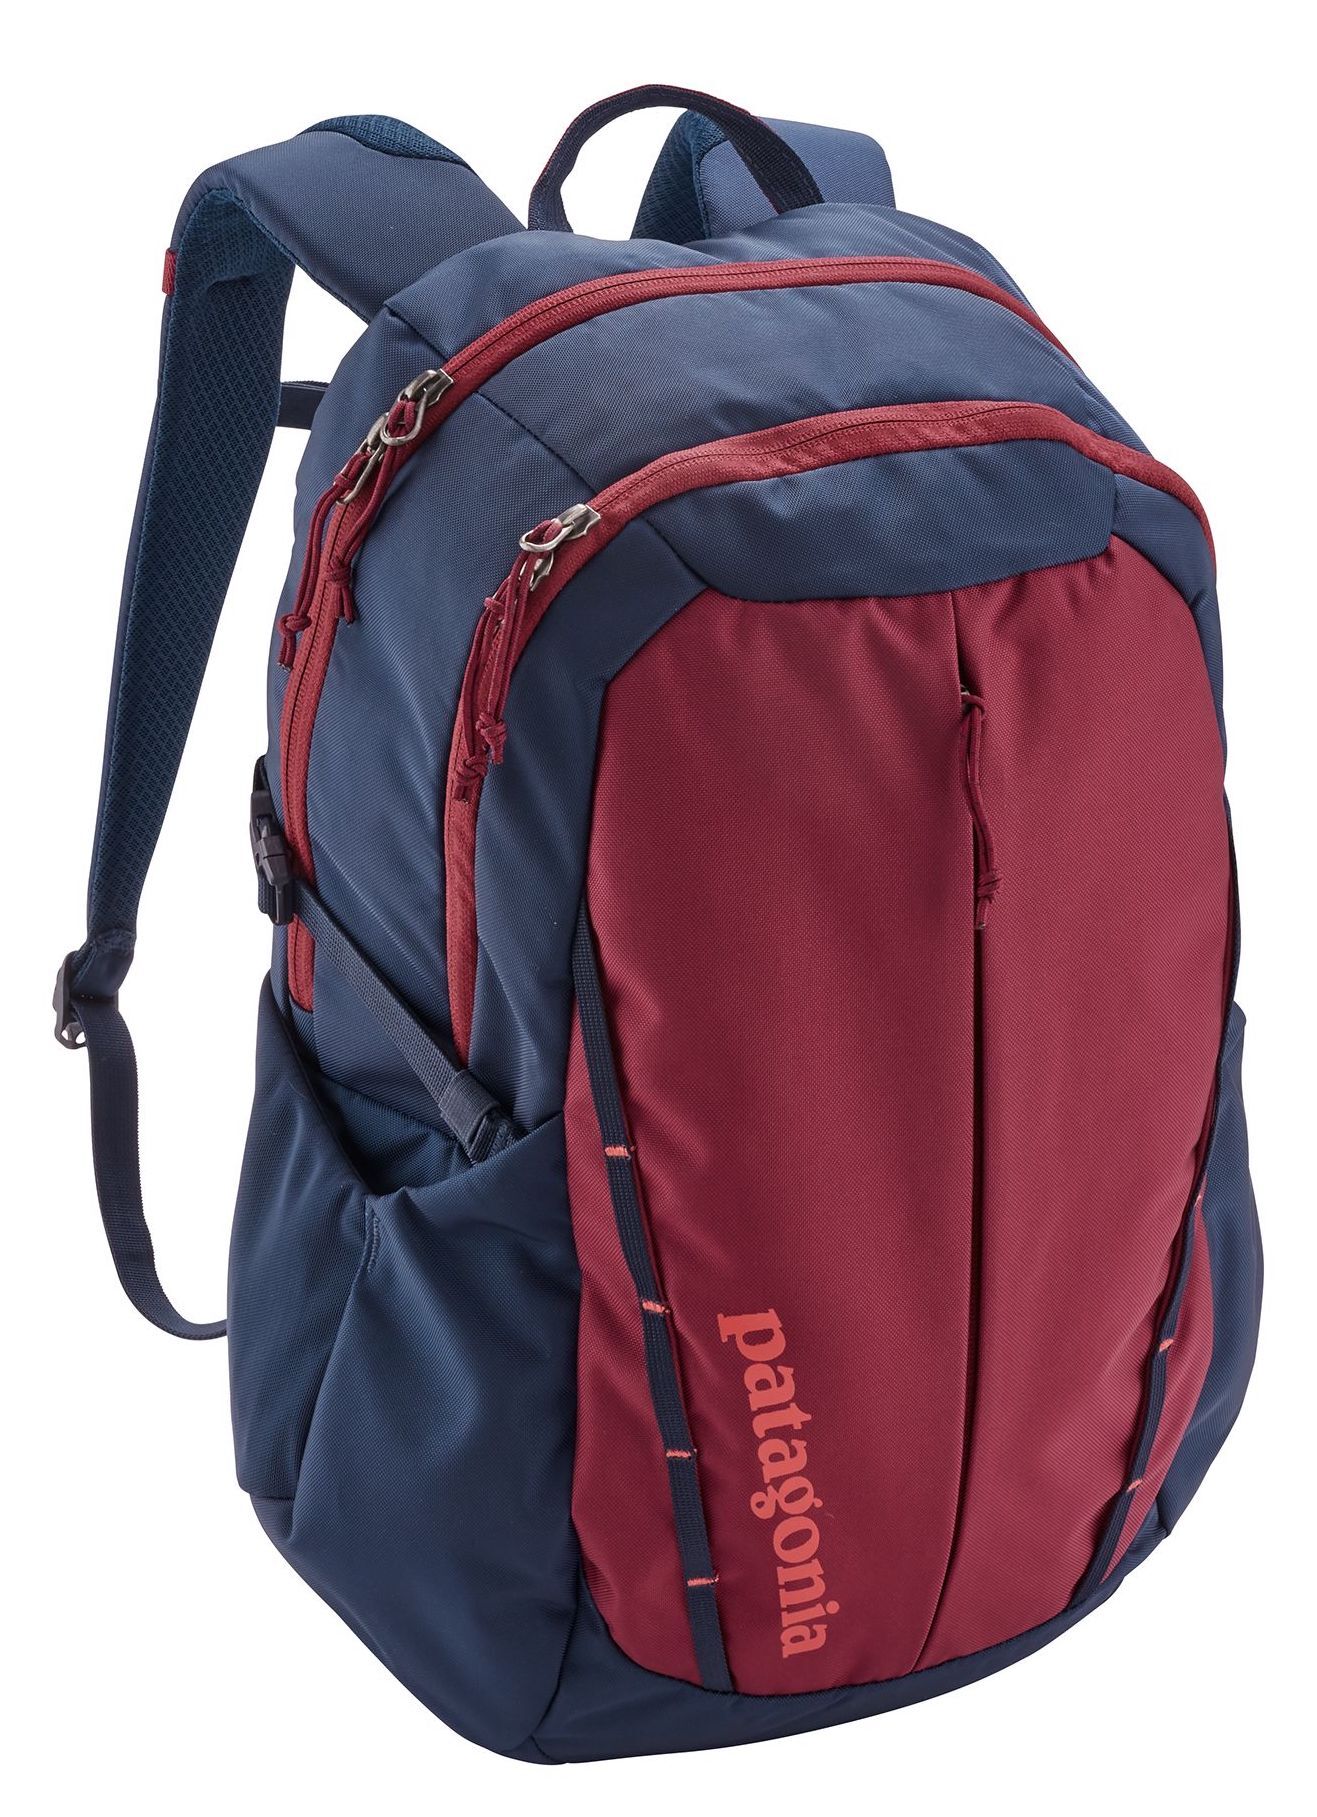 What is the best women's backpack